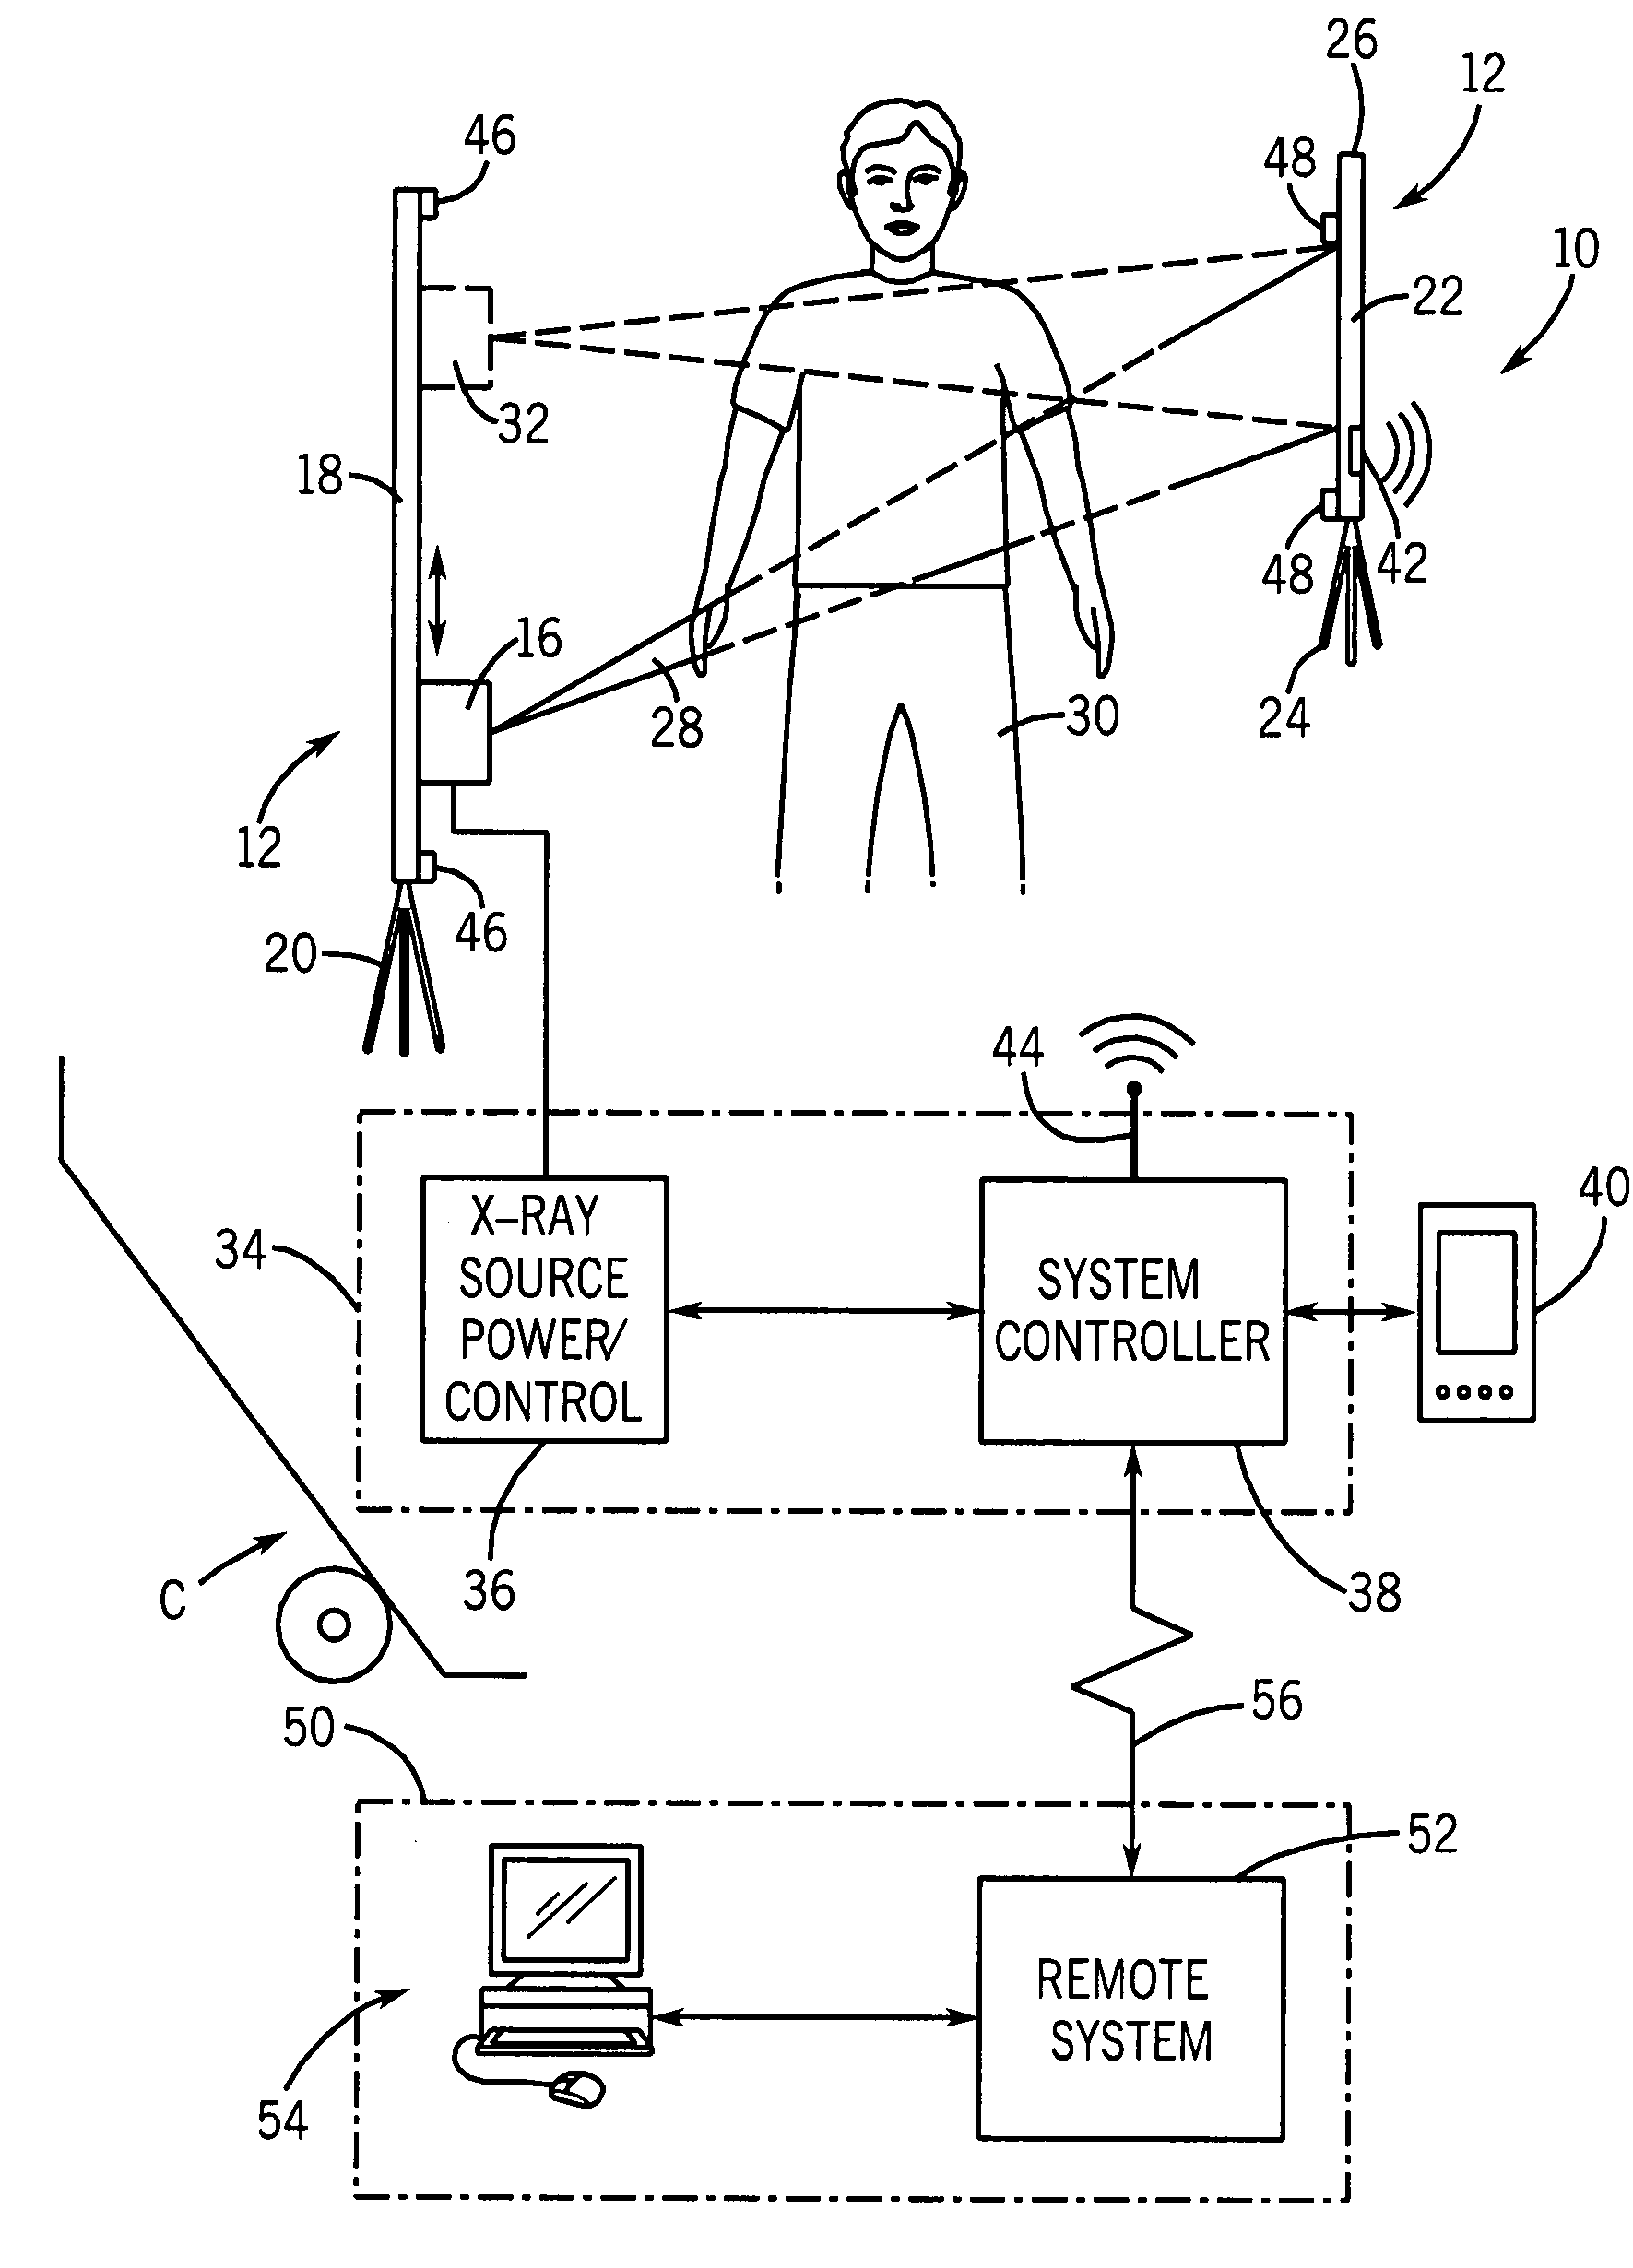 Portable digital tomosynthesis imaging system and method